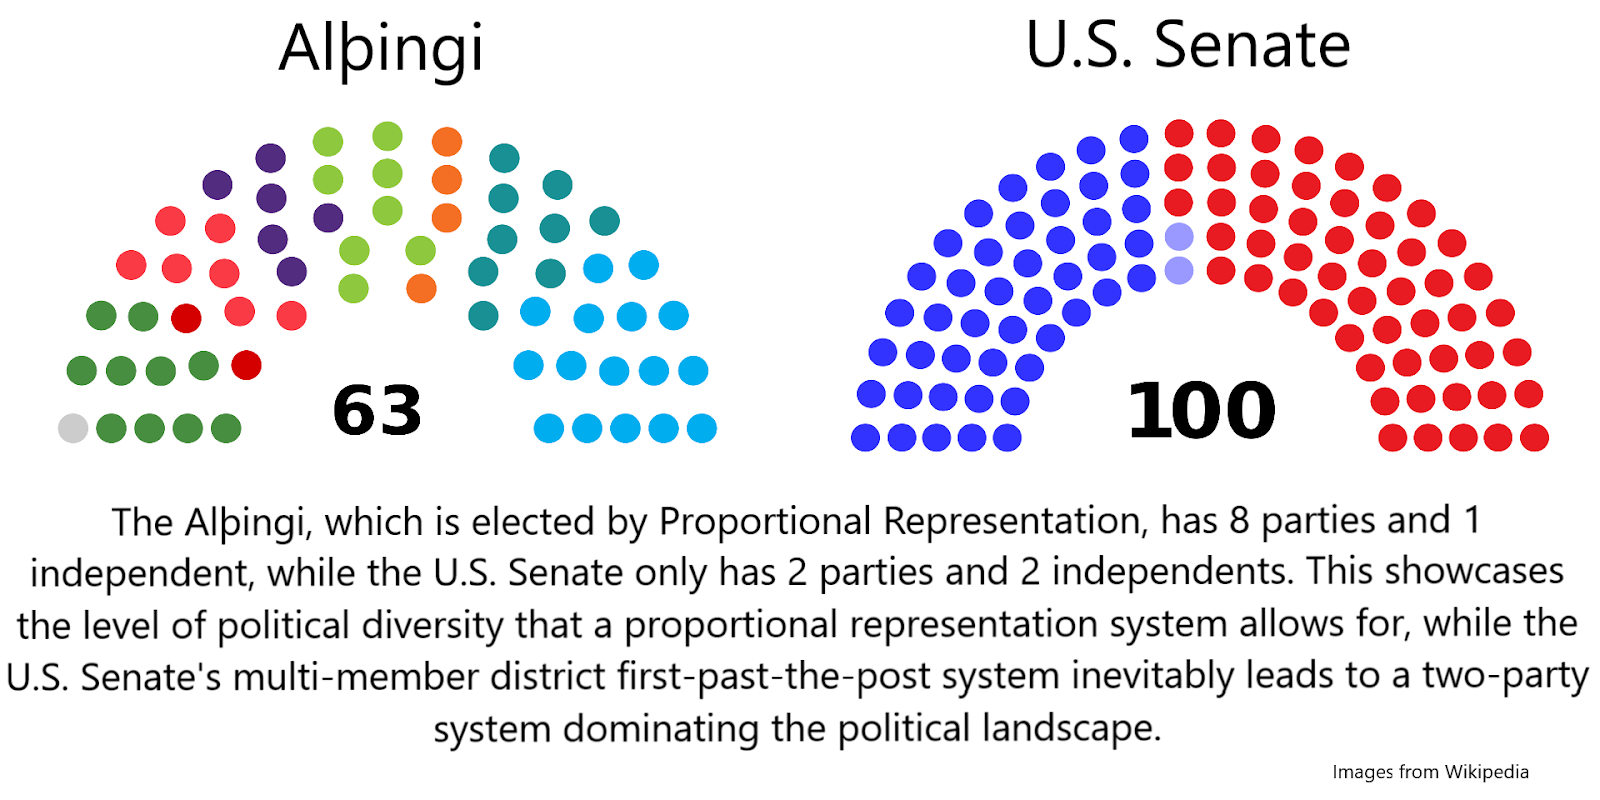 what is representation based on in the house of representatives